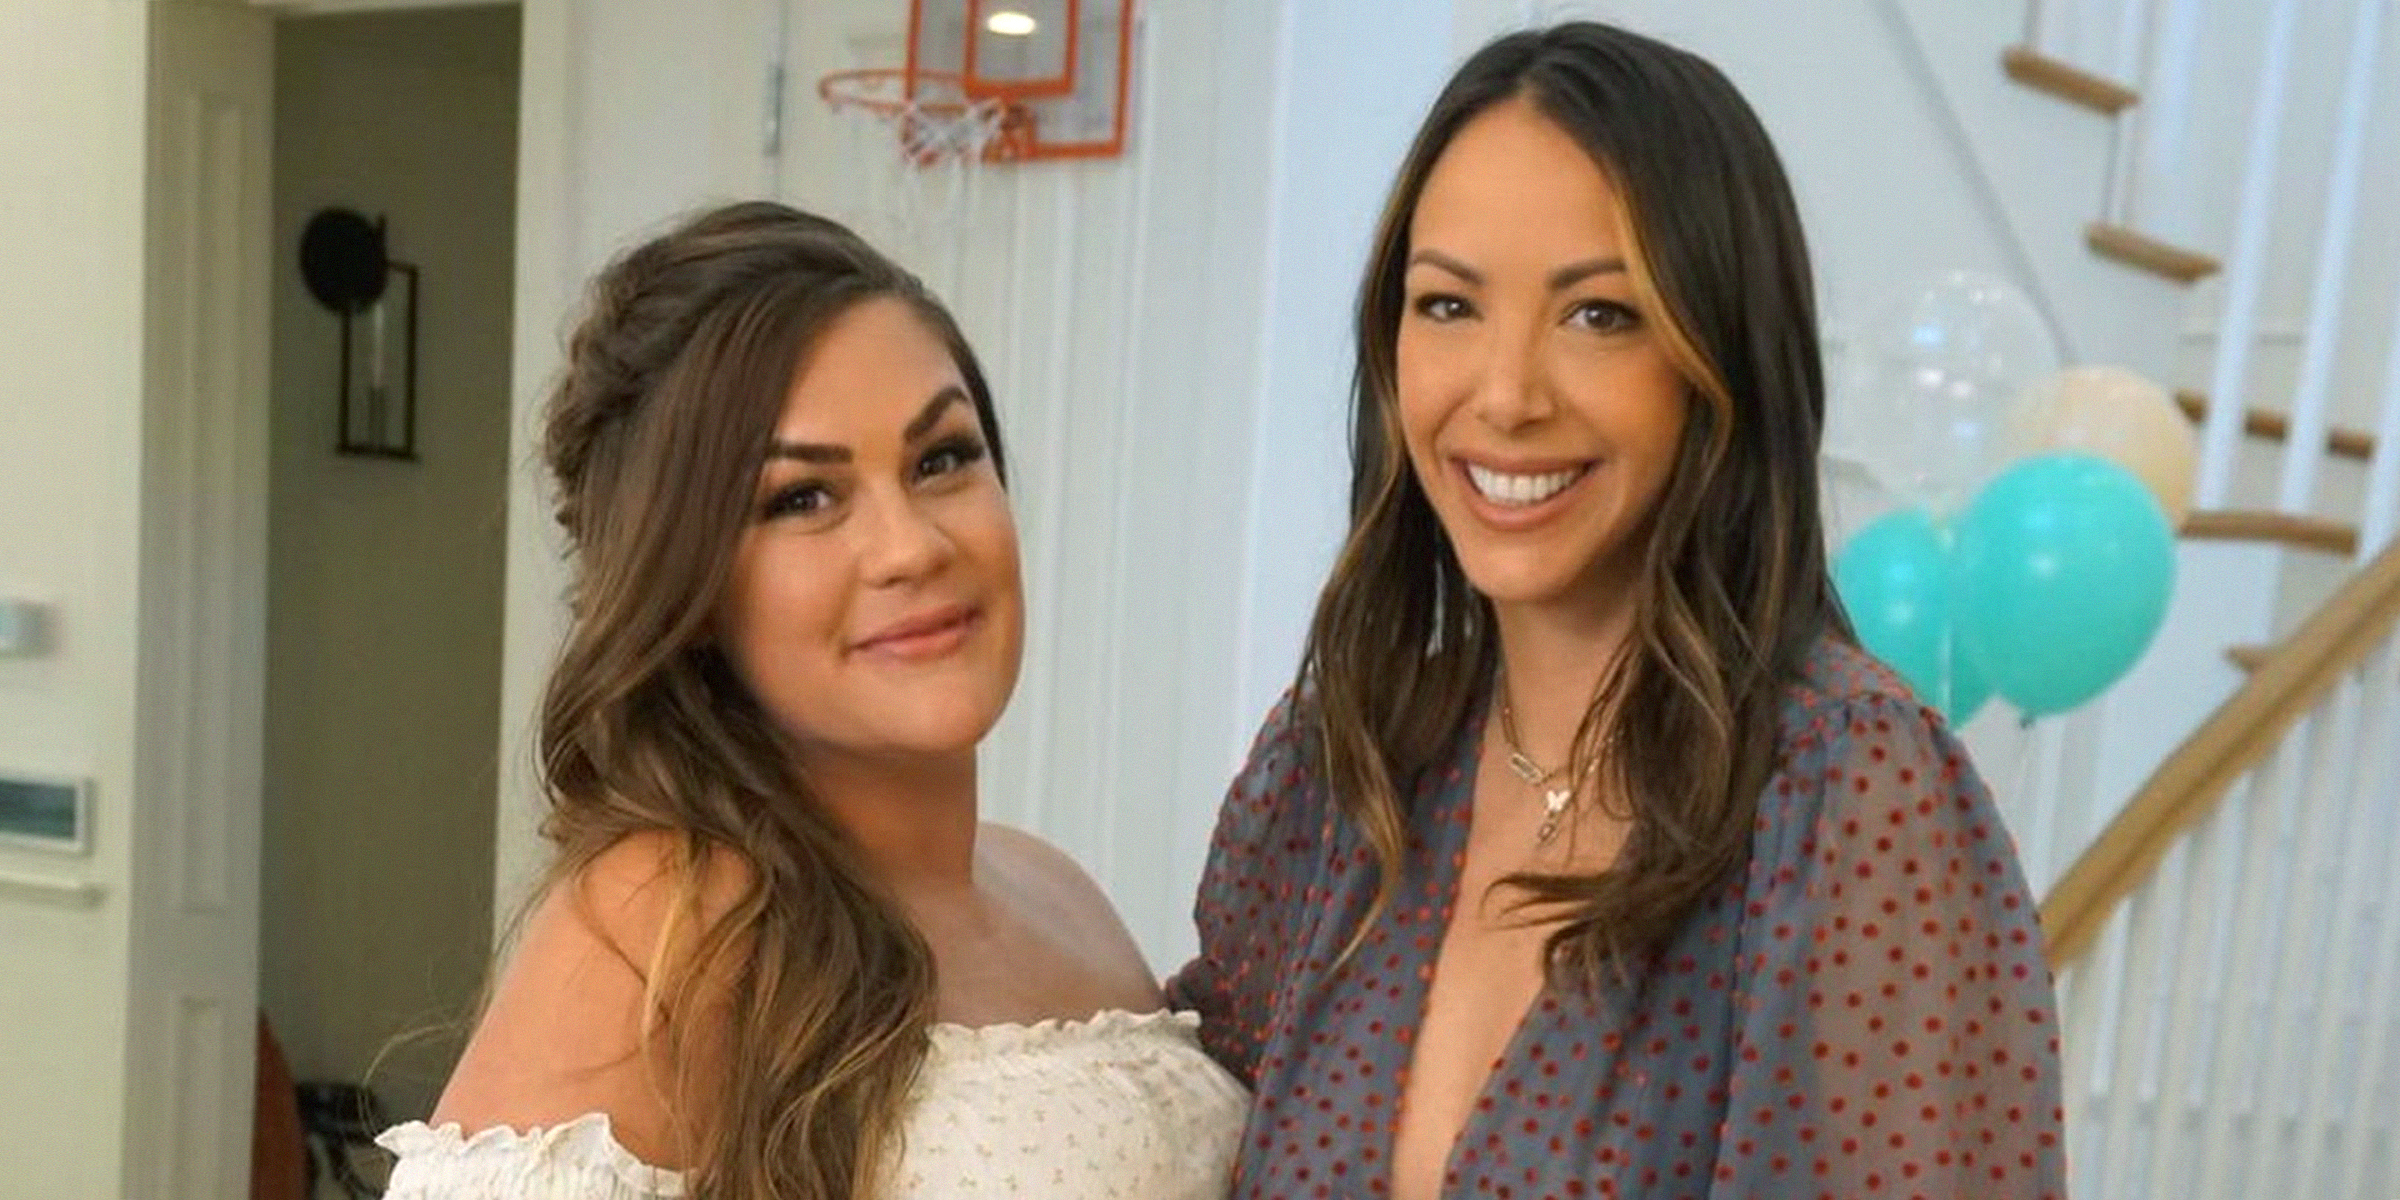 Brittany Cartwright and Kristen Doute. | Source: instagram.com/kristendoute